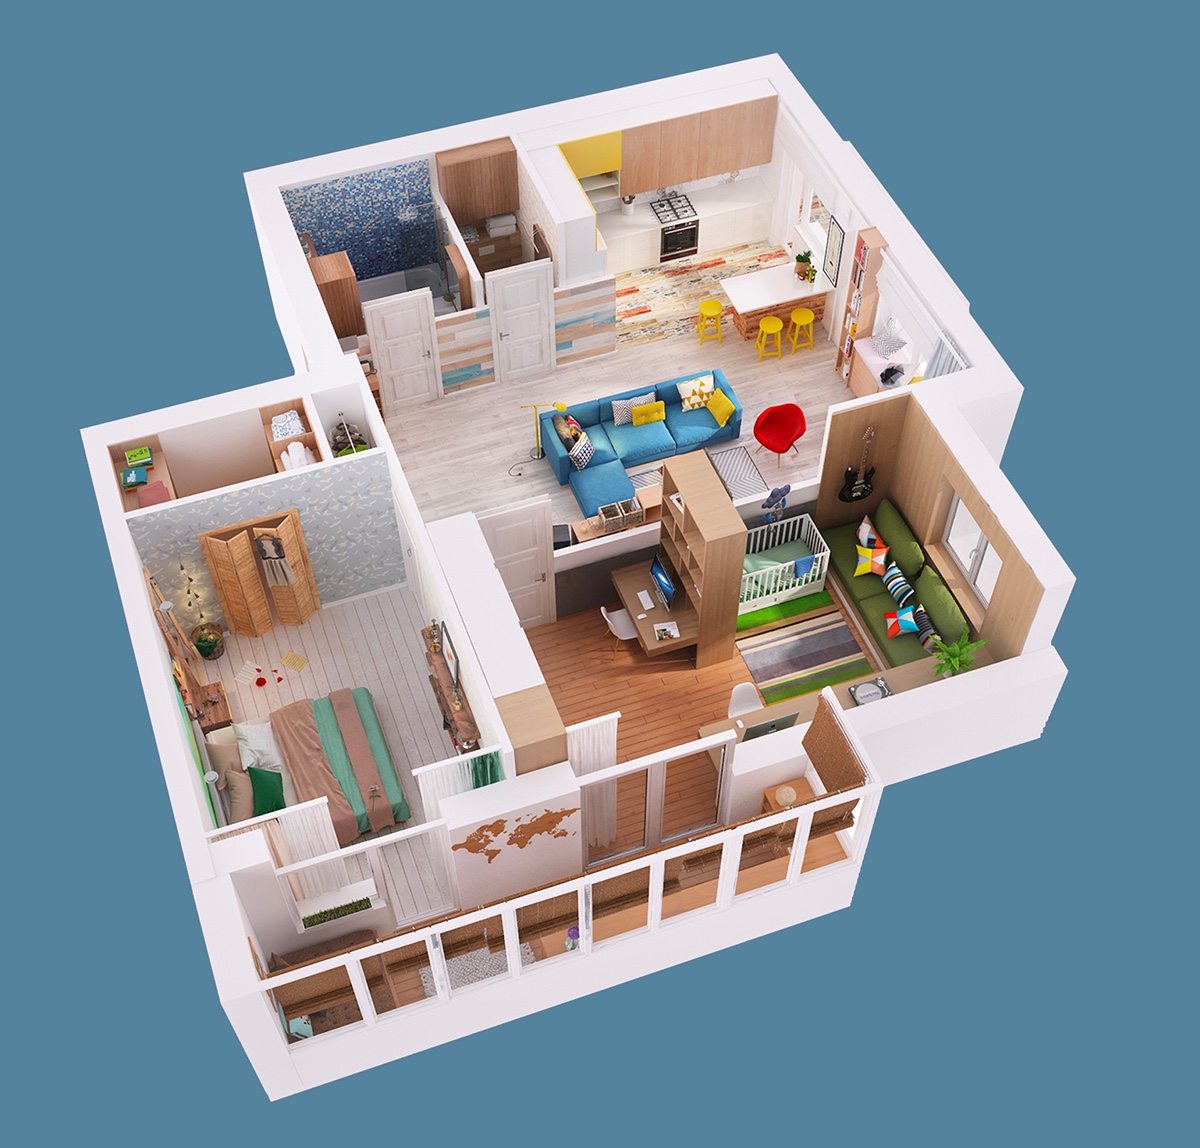 2 Single Story Homes With 80 Square Meter Floor